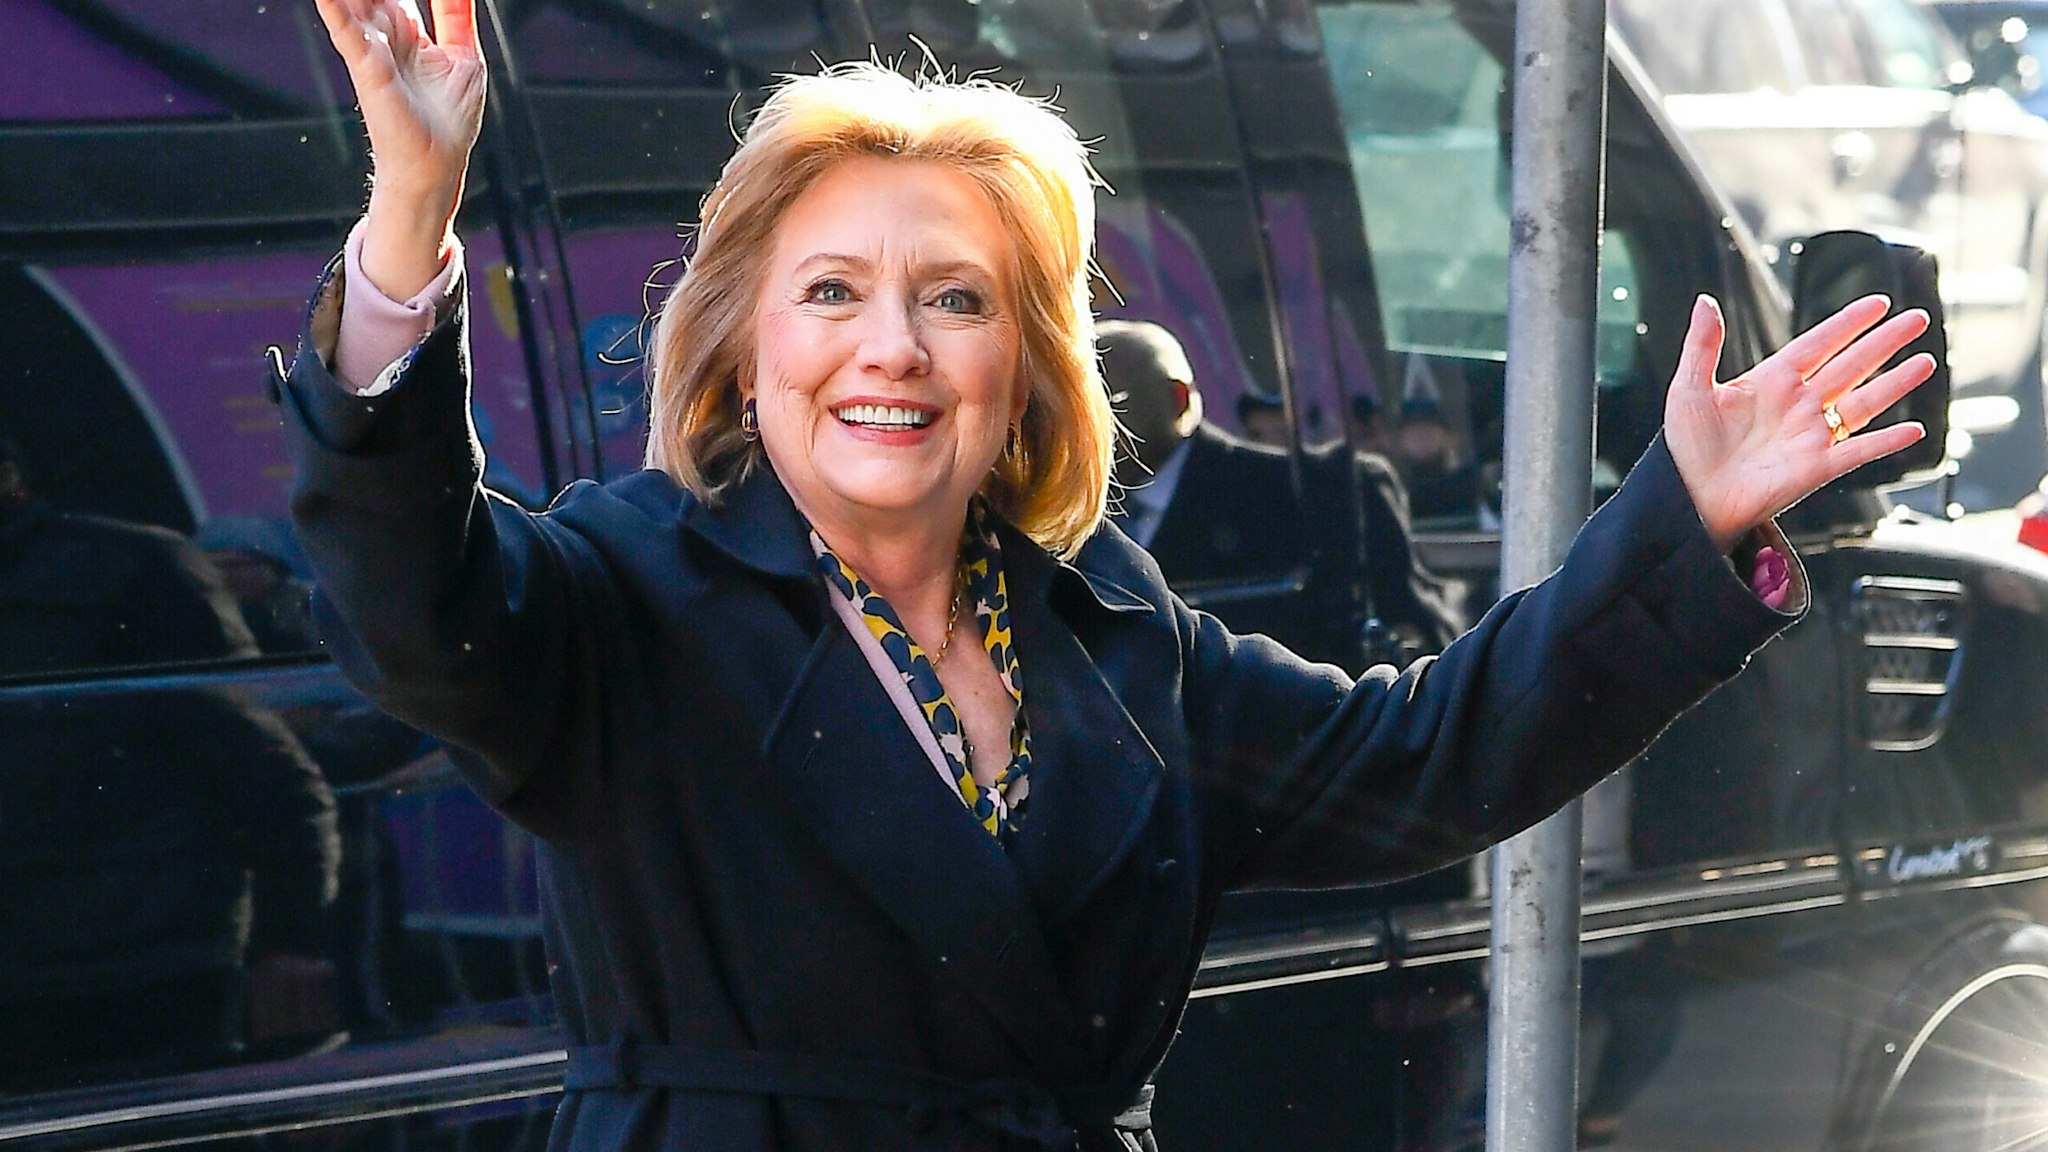 NEW YORK, NY - MARCH 03: Hillary Clinton is seen outside good morning america on March 3, 2020 in New York City. (Photo by Raymond Hall/GC Images)